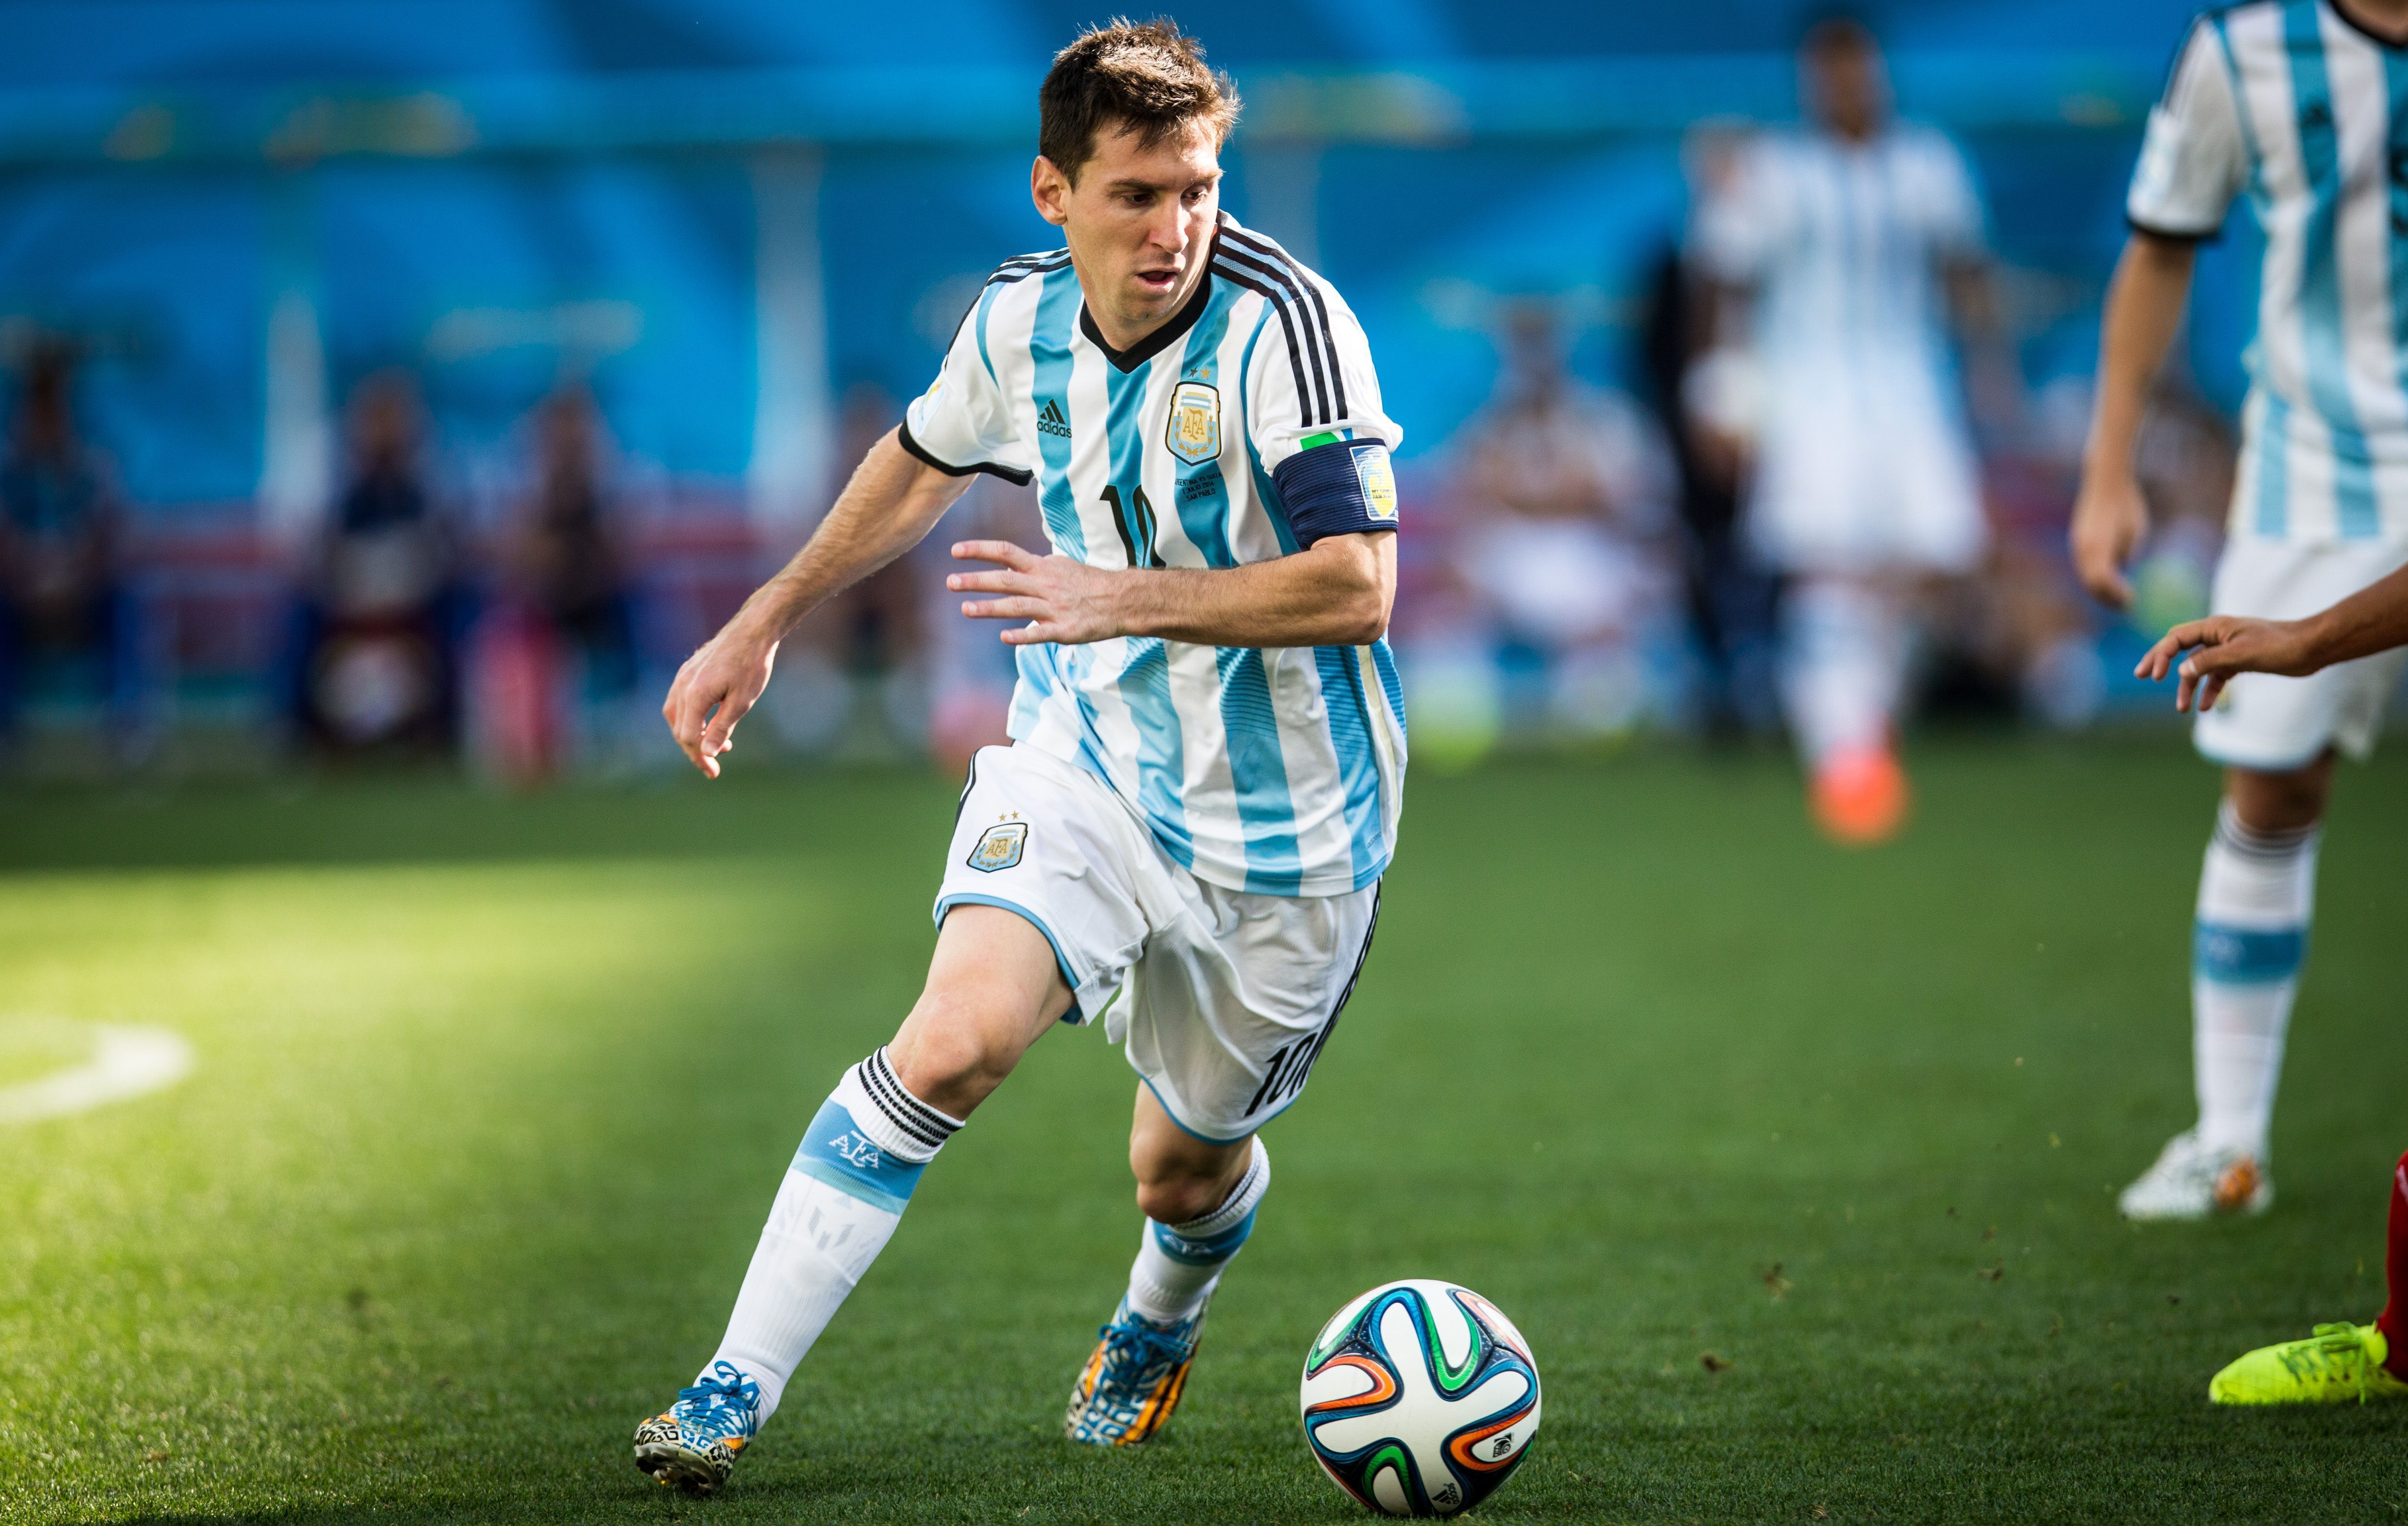 lionel messi, argentina national football team, sports, soccer